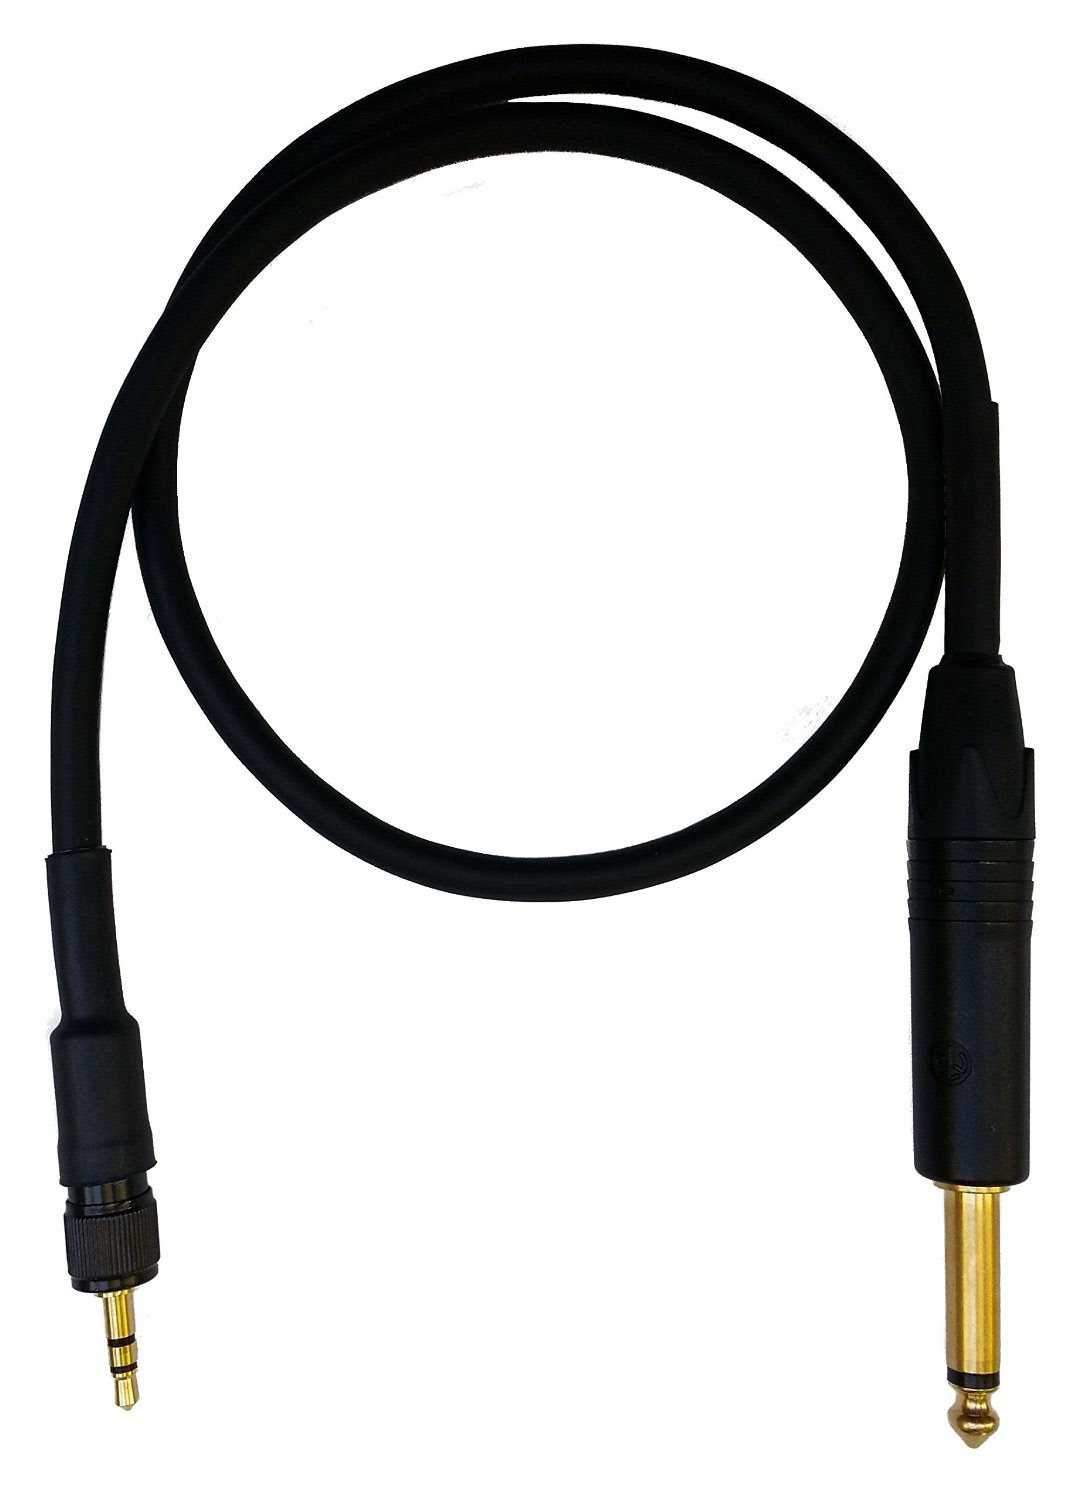 Mogami Beltpack Instrument Cable for Sennheiser Wireless Systems 30ft - ProSound and Stage Lighting